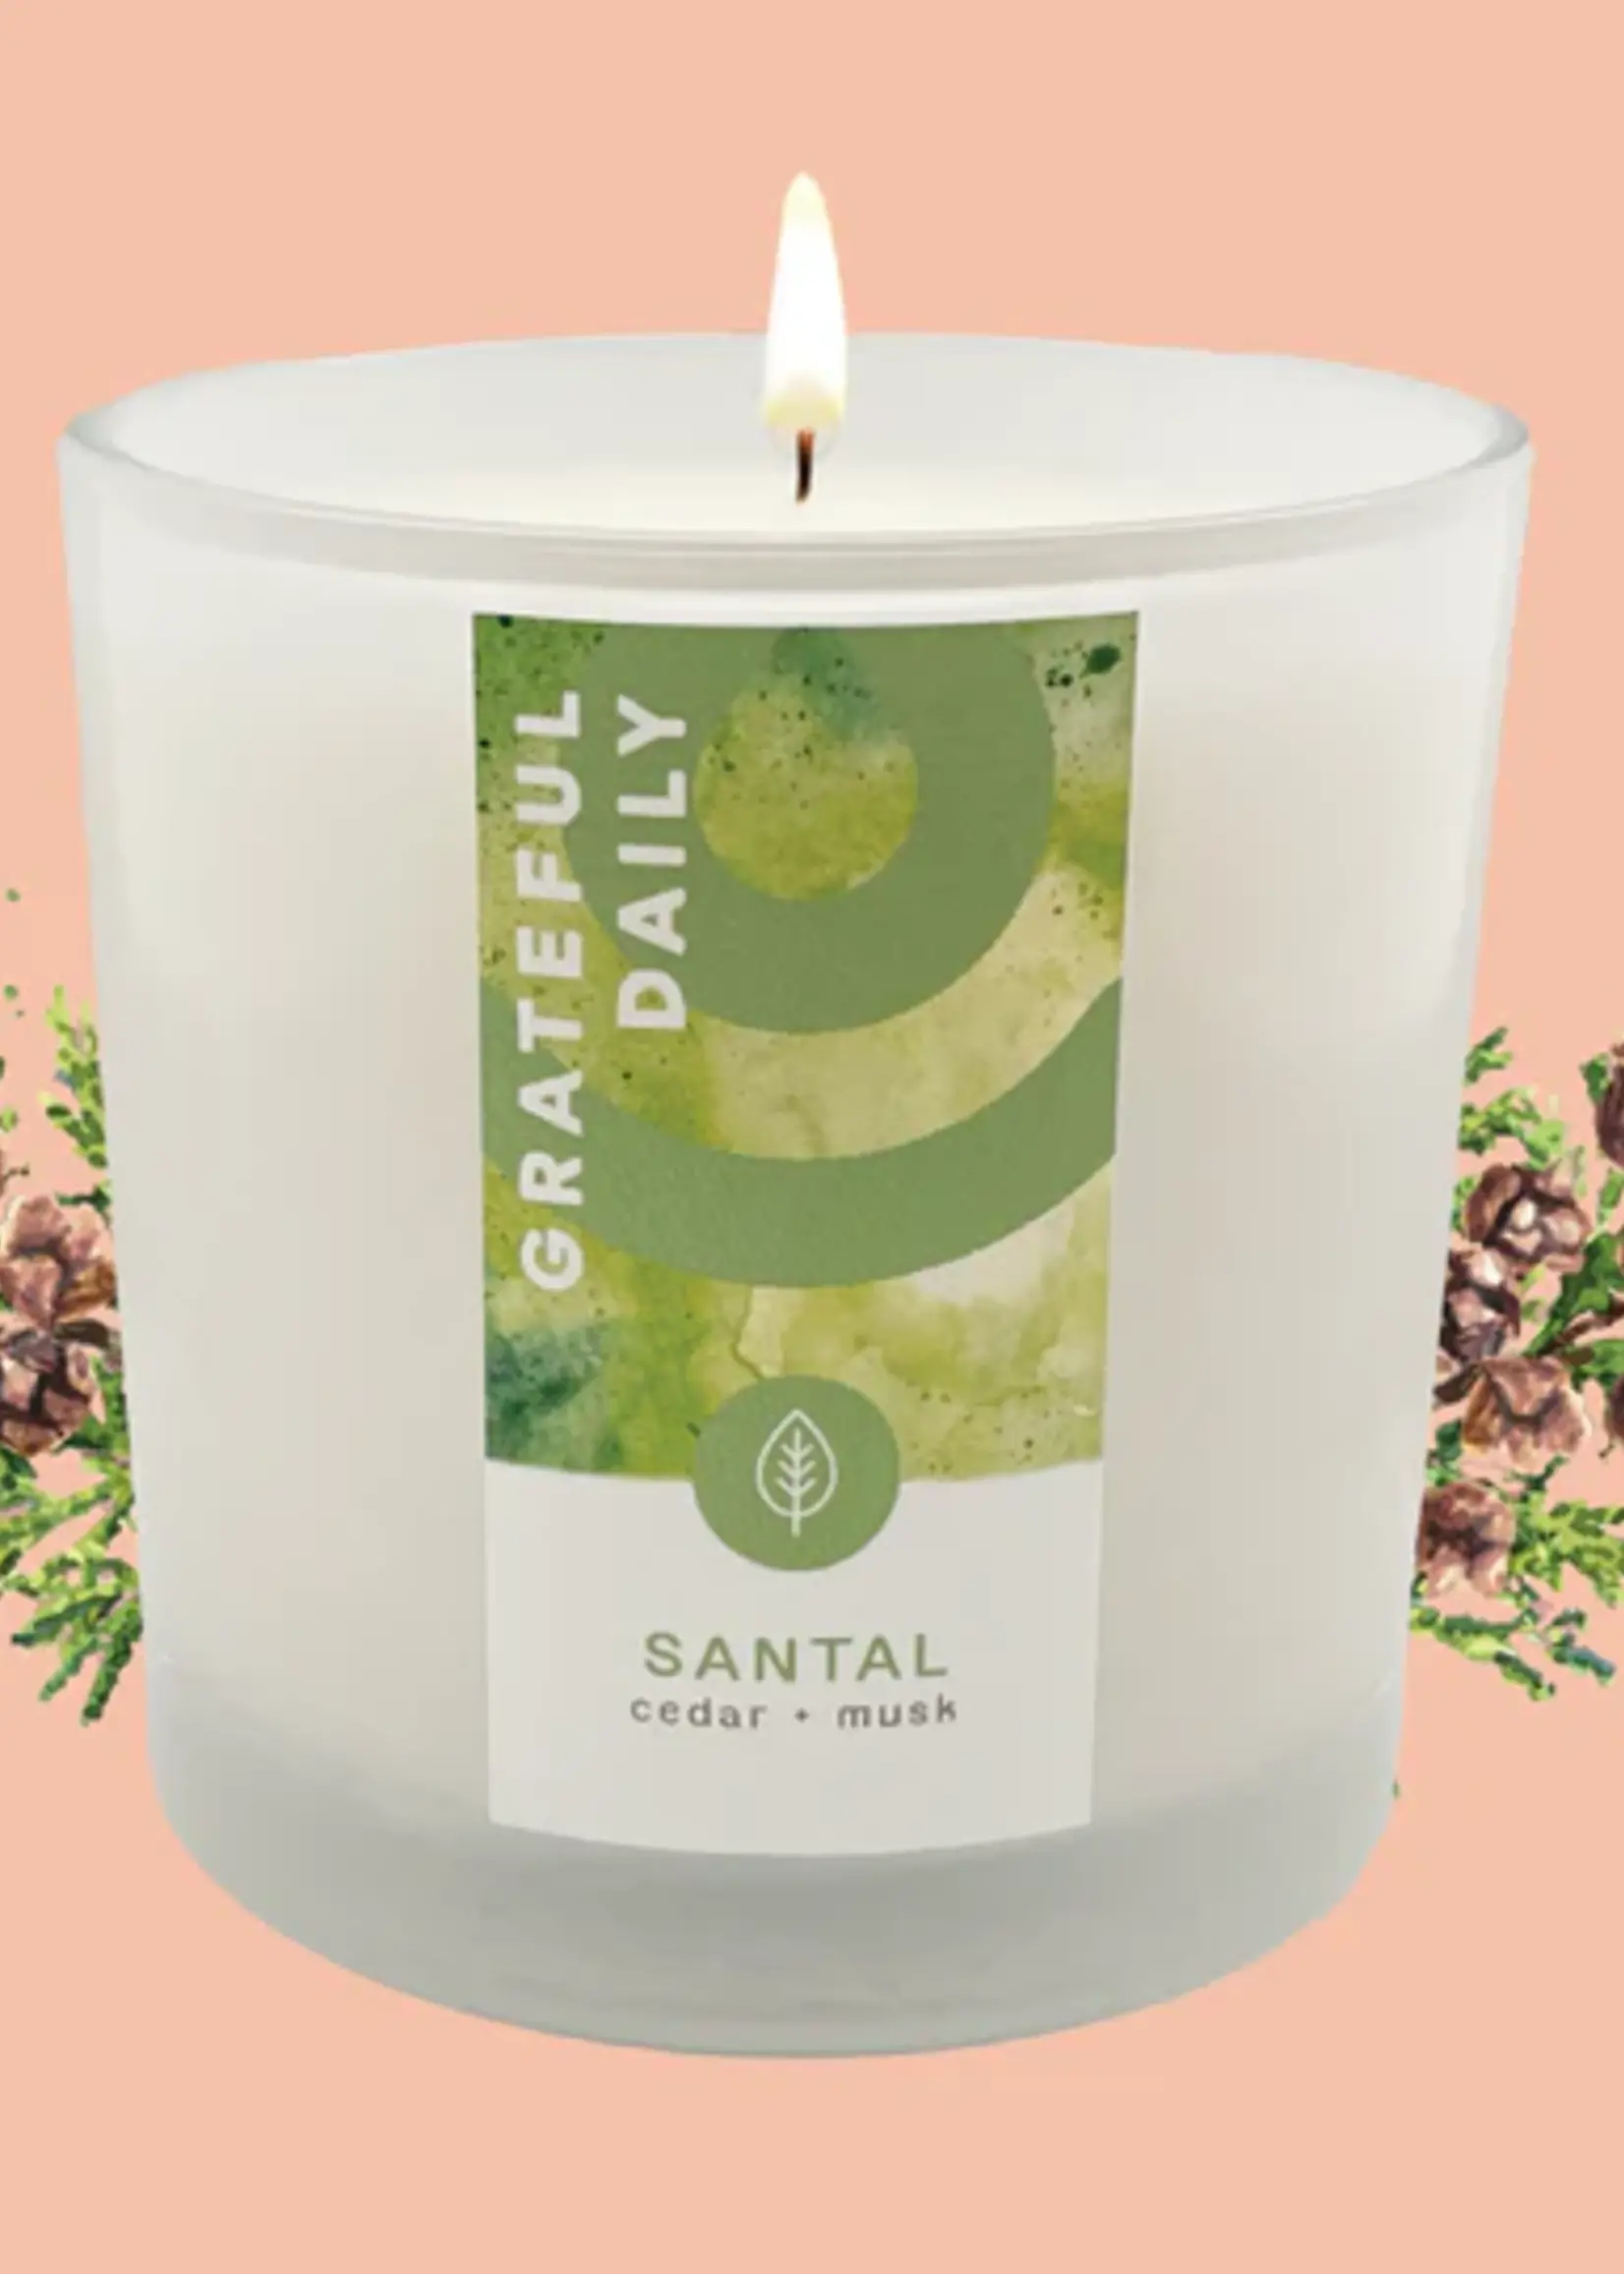 Grateful Daily Soy Scented Candle